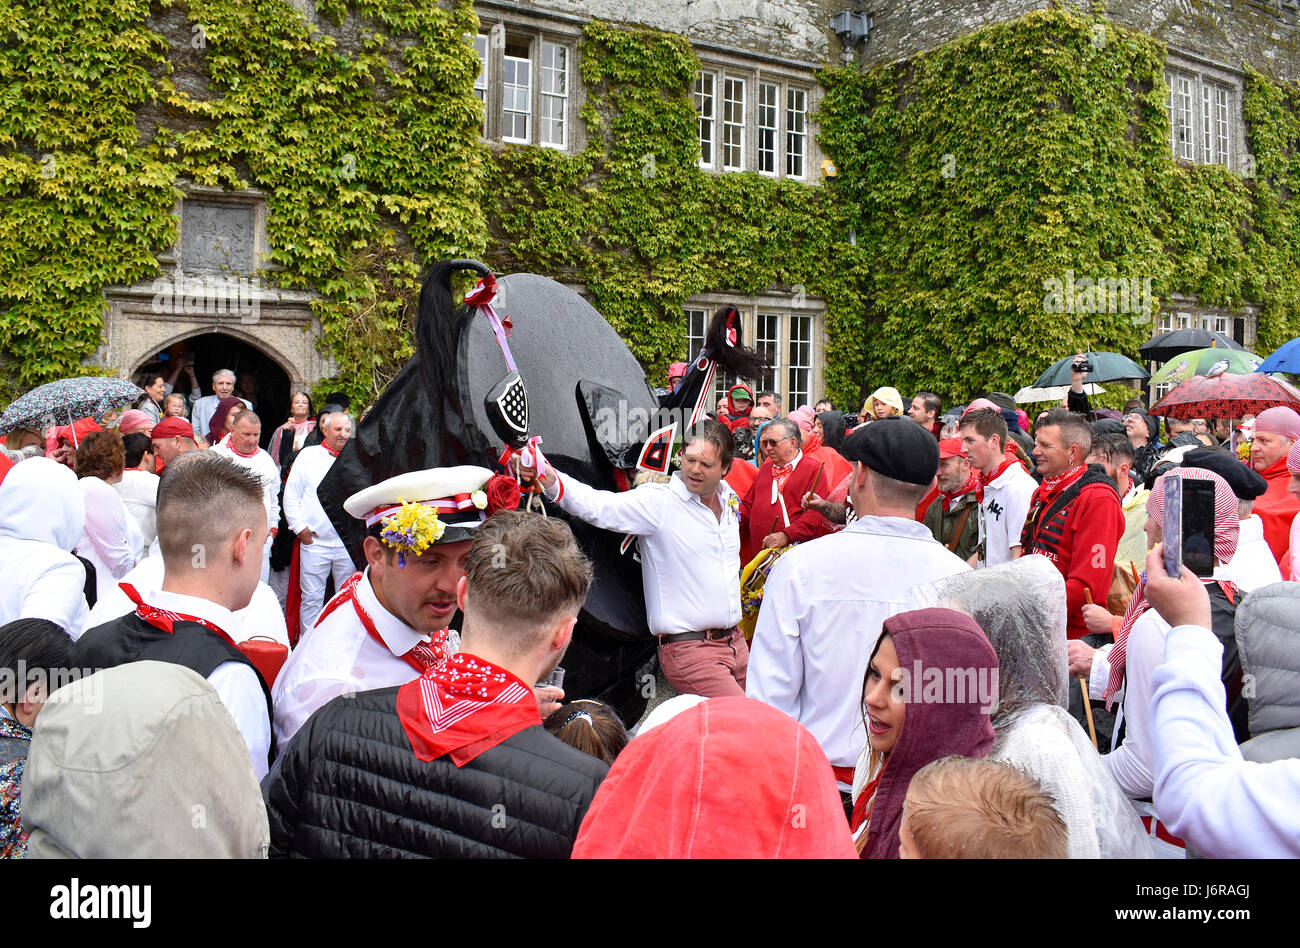 Padstow, Cornwall, UK. 1st May 2017, The Red Oss and revellers dance outside Prideaux Place in Padstow during the May Day Obby Oss celebrations. Stock Photo